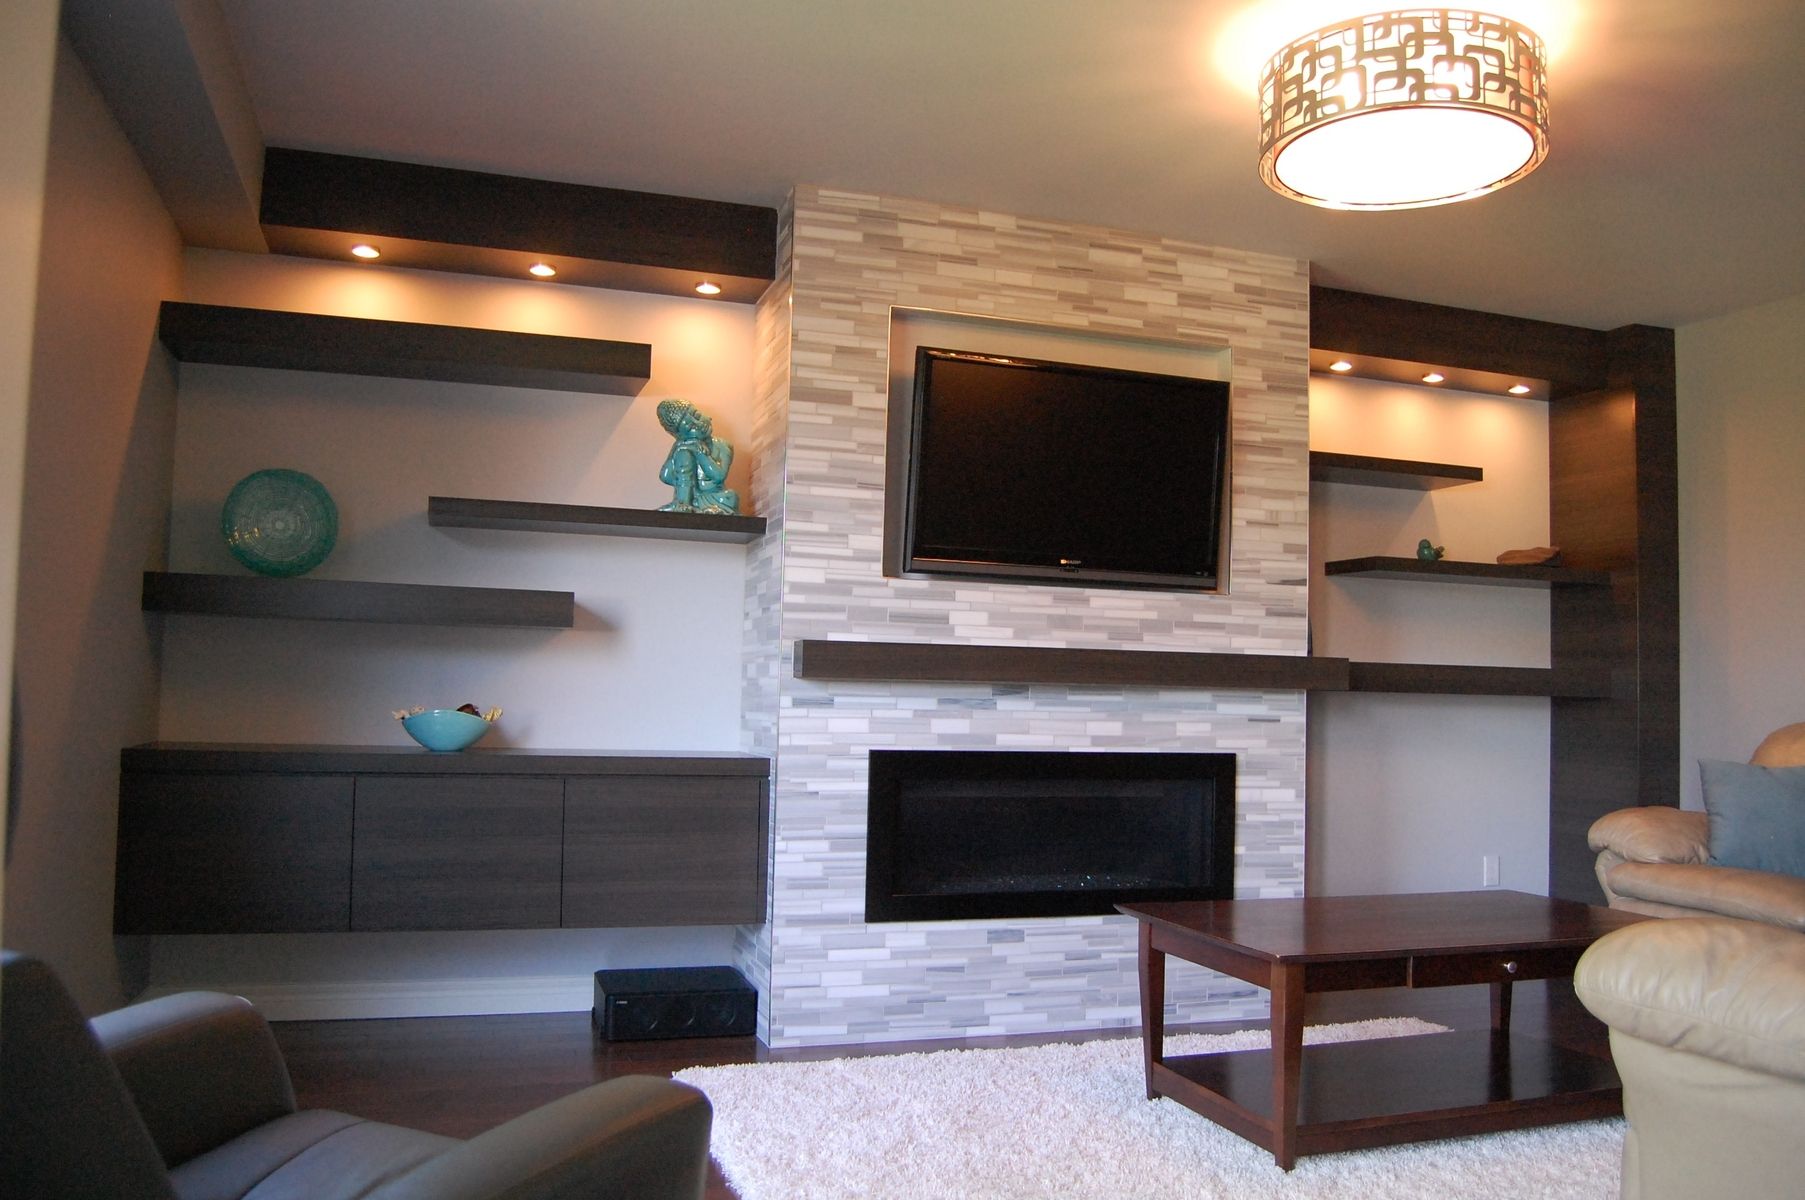 Rectangular Living Room Layout with Fireplace Unique Custom Modern Wall Unit Made Pletely From A Printed